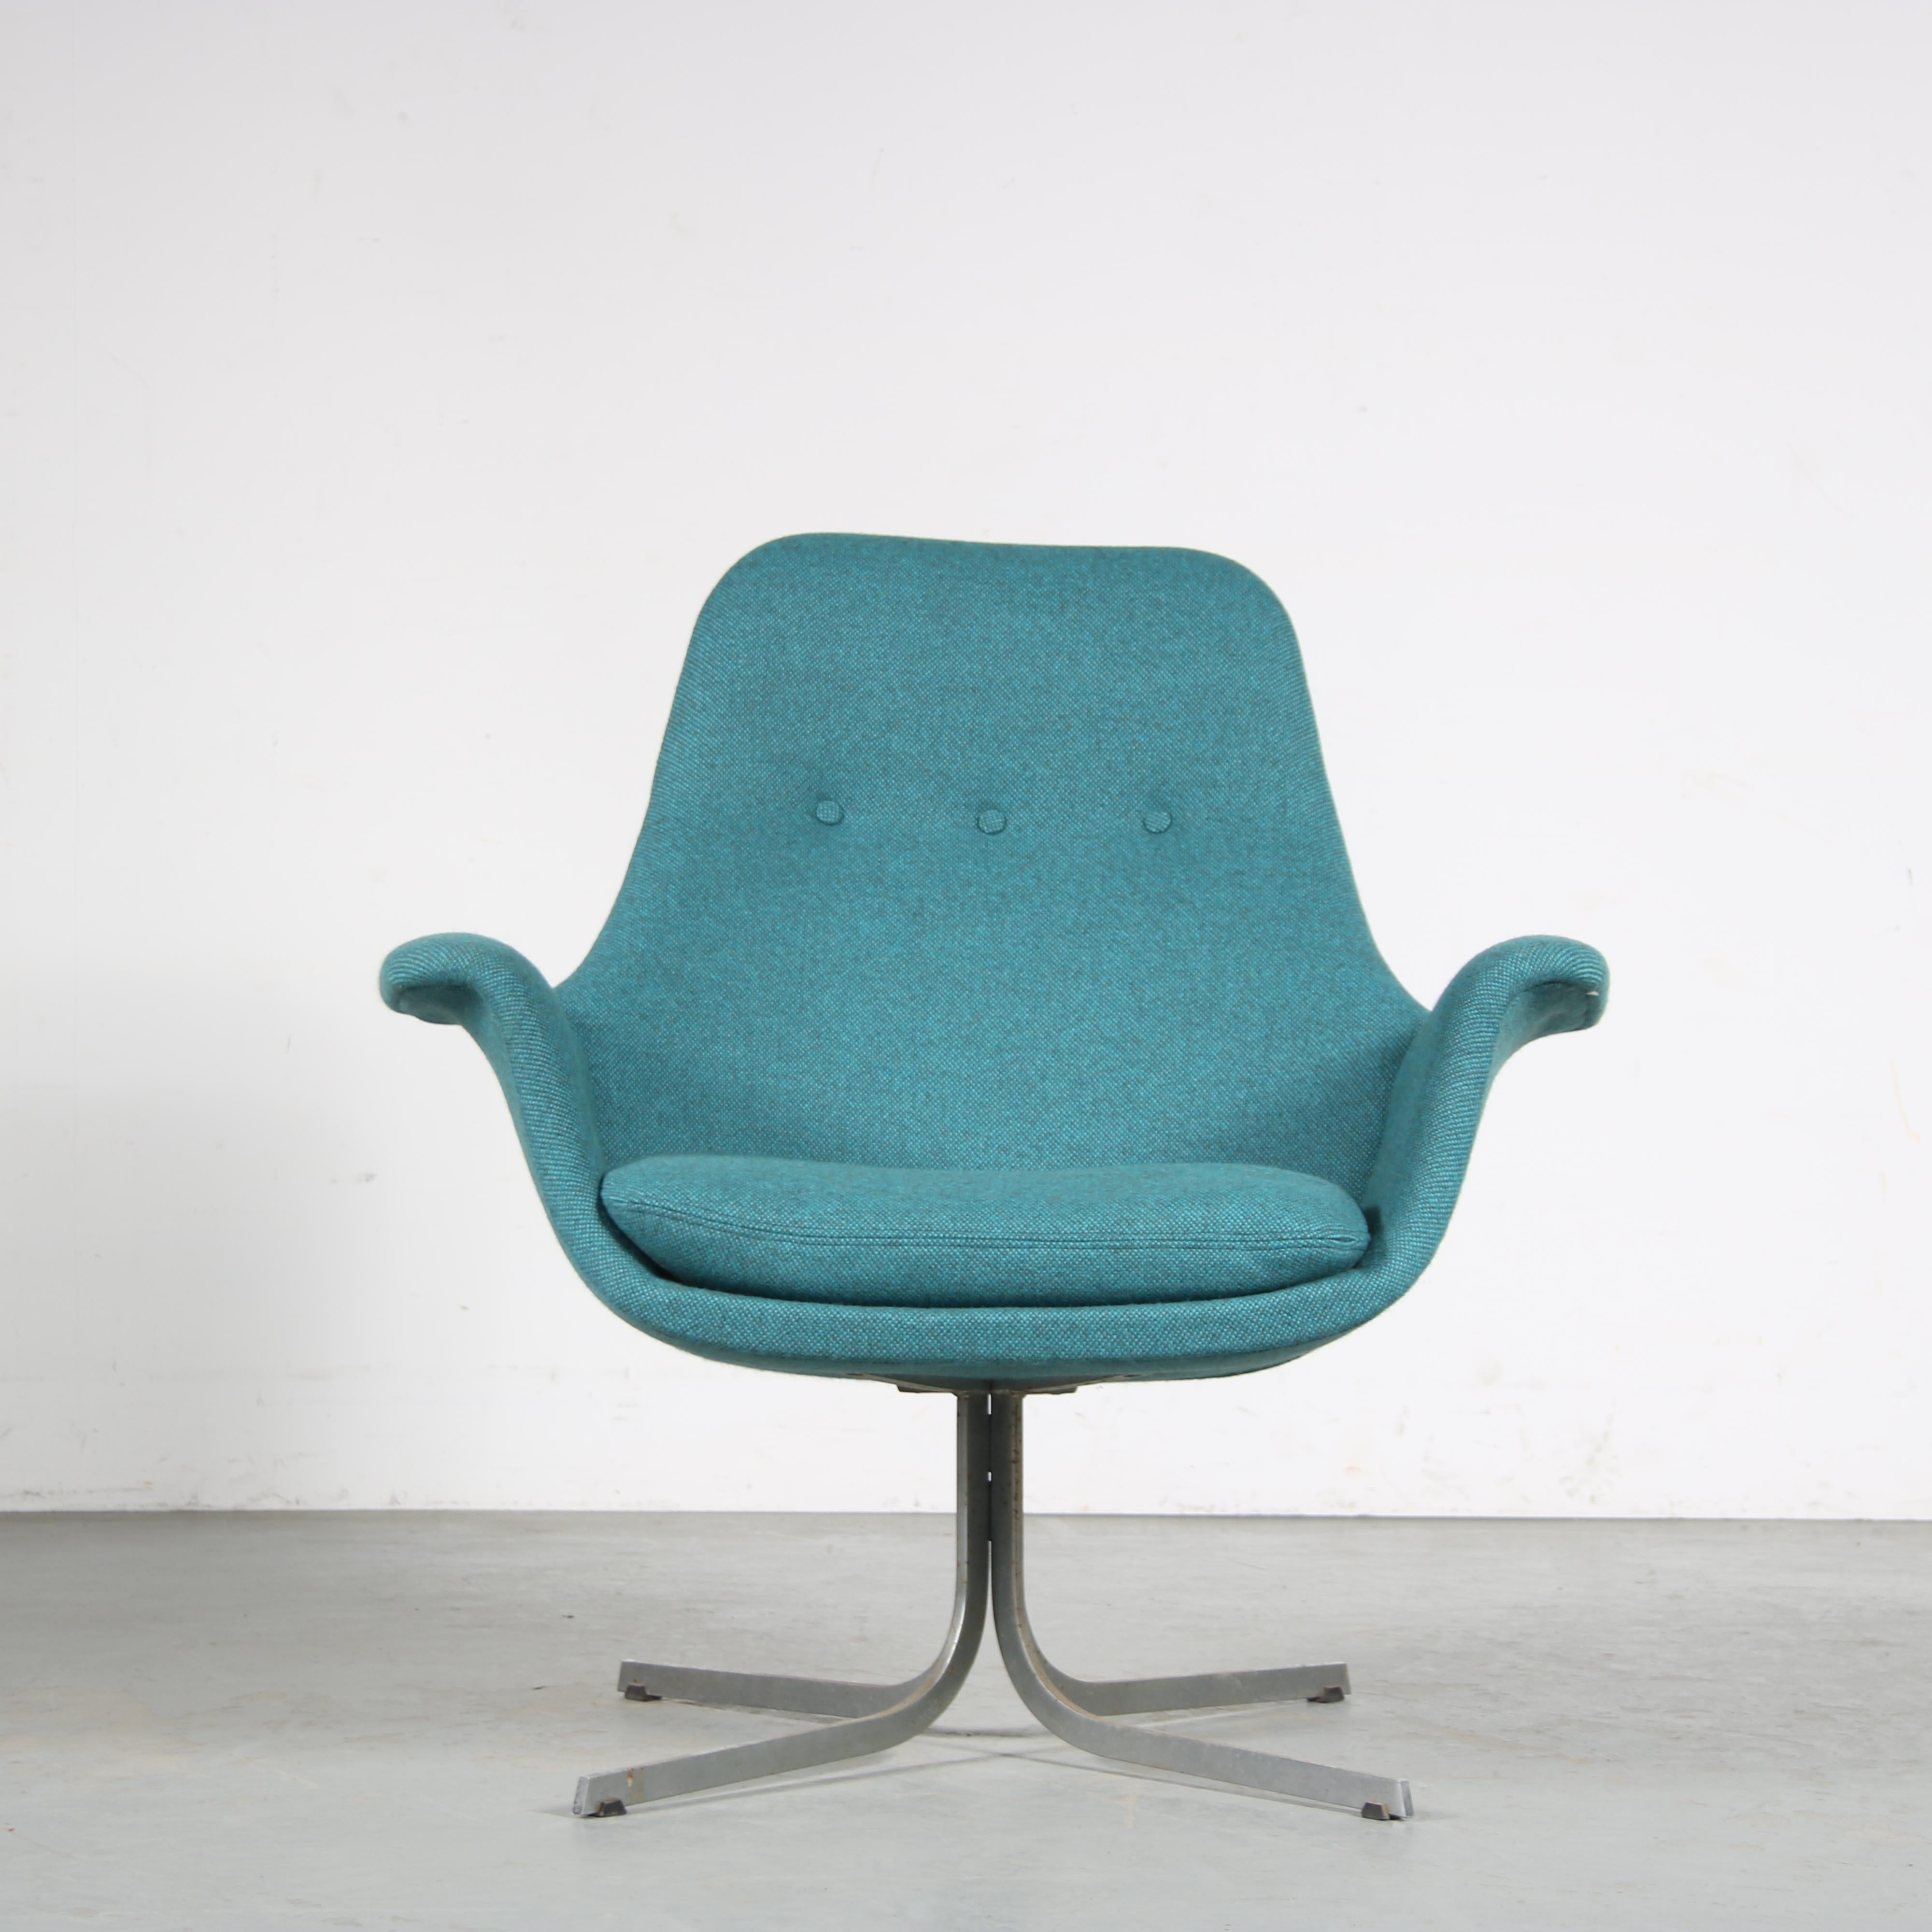 Metal Rare Pierre Paulin Lounge Chair for Artifort, Netherlands 1950 For Sale